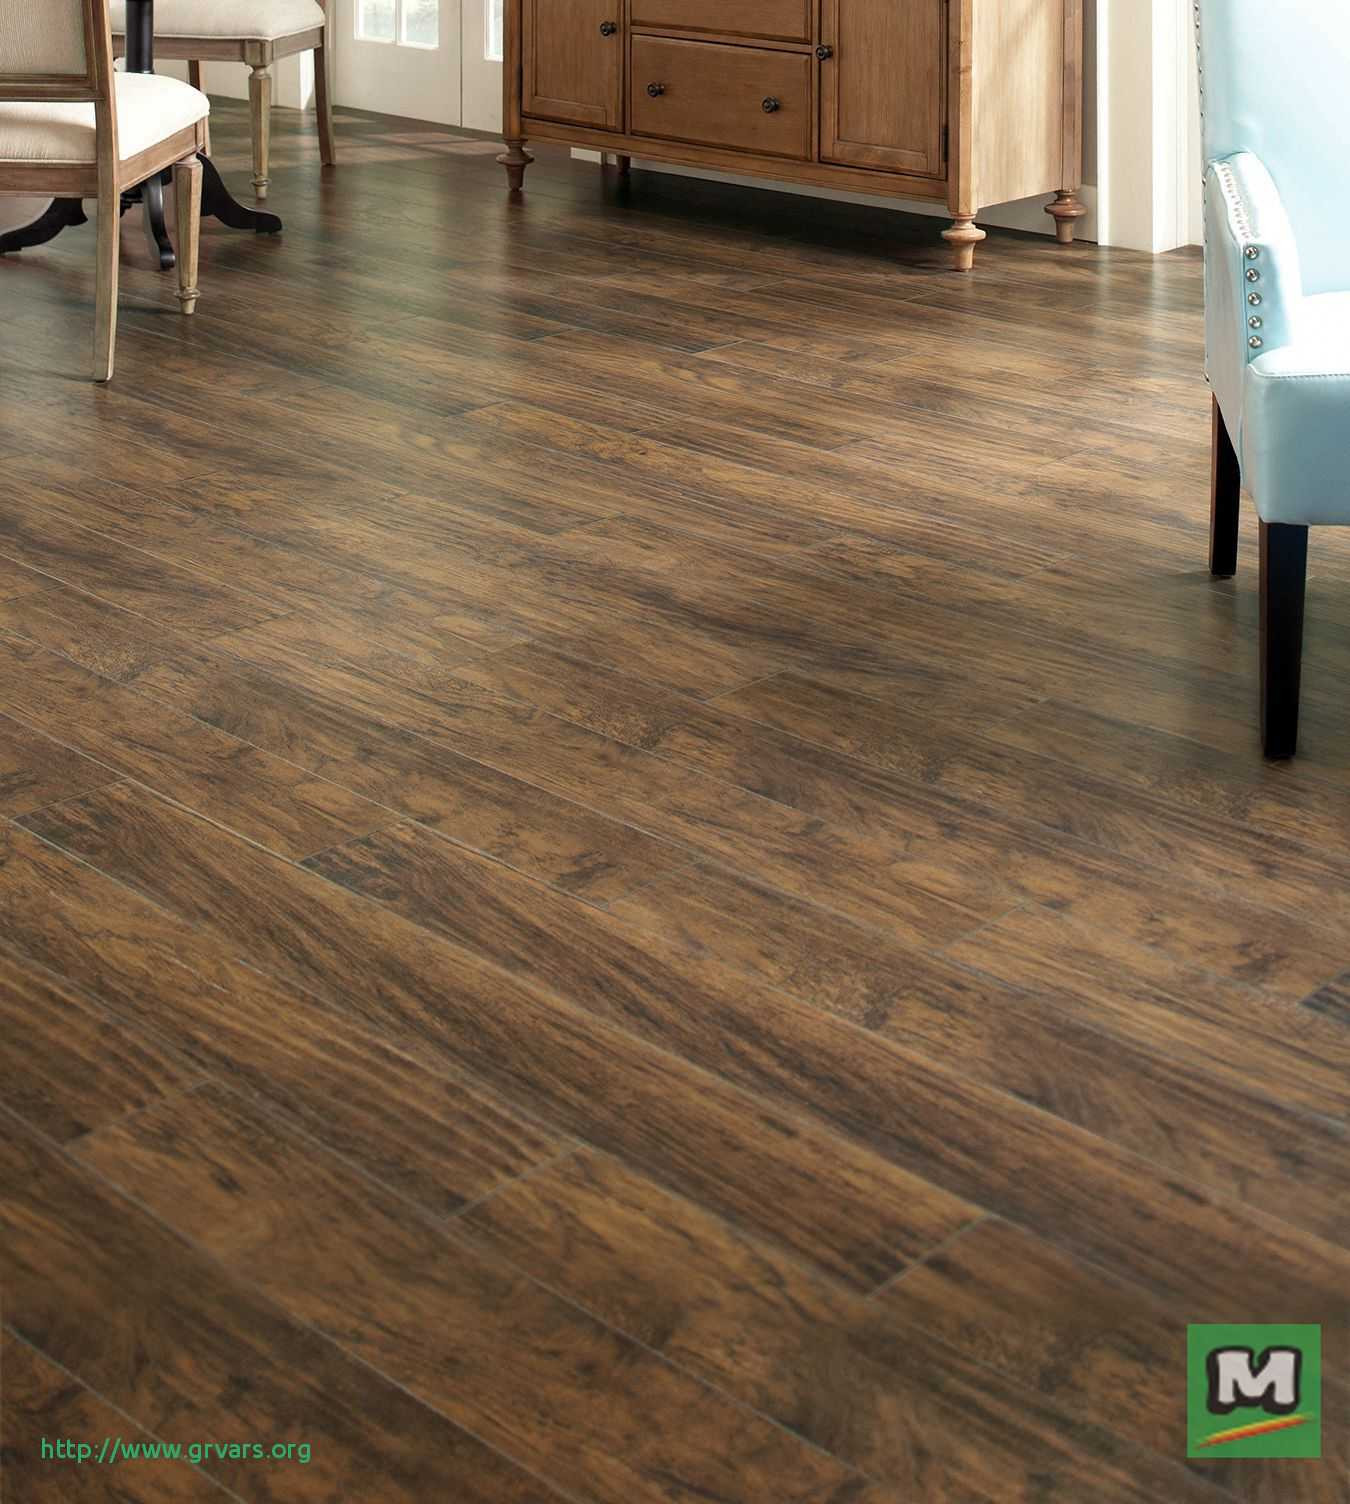 25 Trendy Golden Acacia Hardwood Flooring 2024 free download golden acacia hardwood flooring of does hardwood floors increase home value wikizie co in do wood floors increase home value meilleur de 40 country living